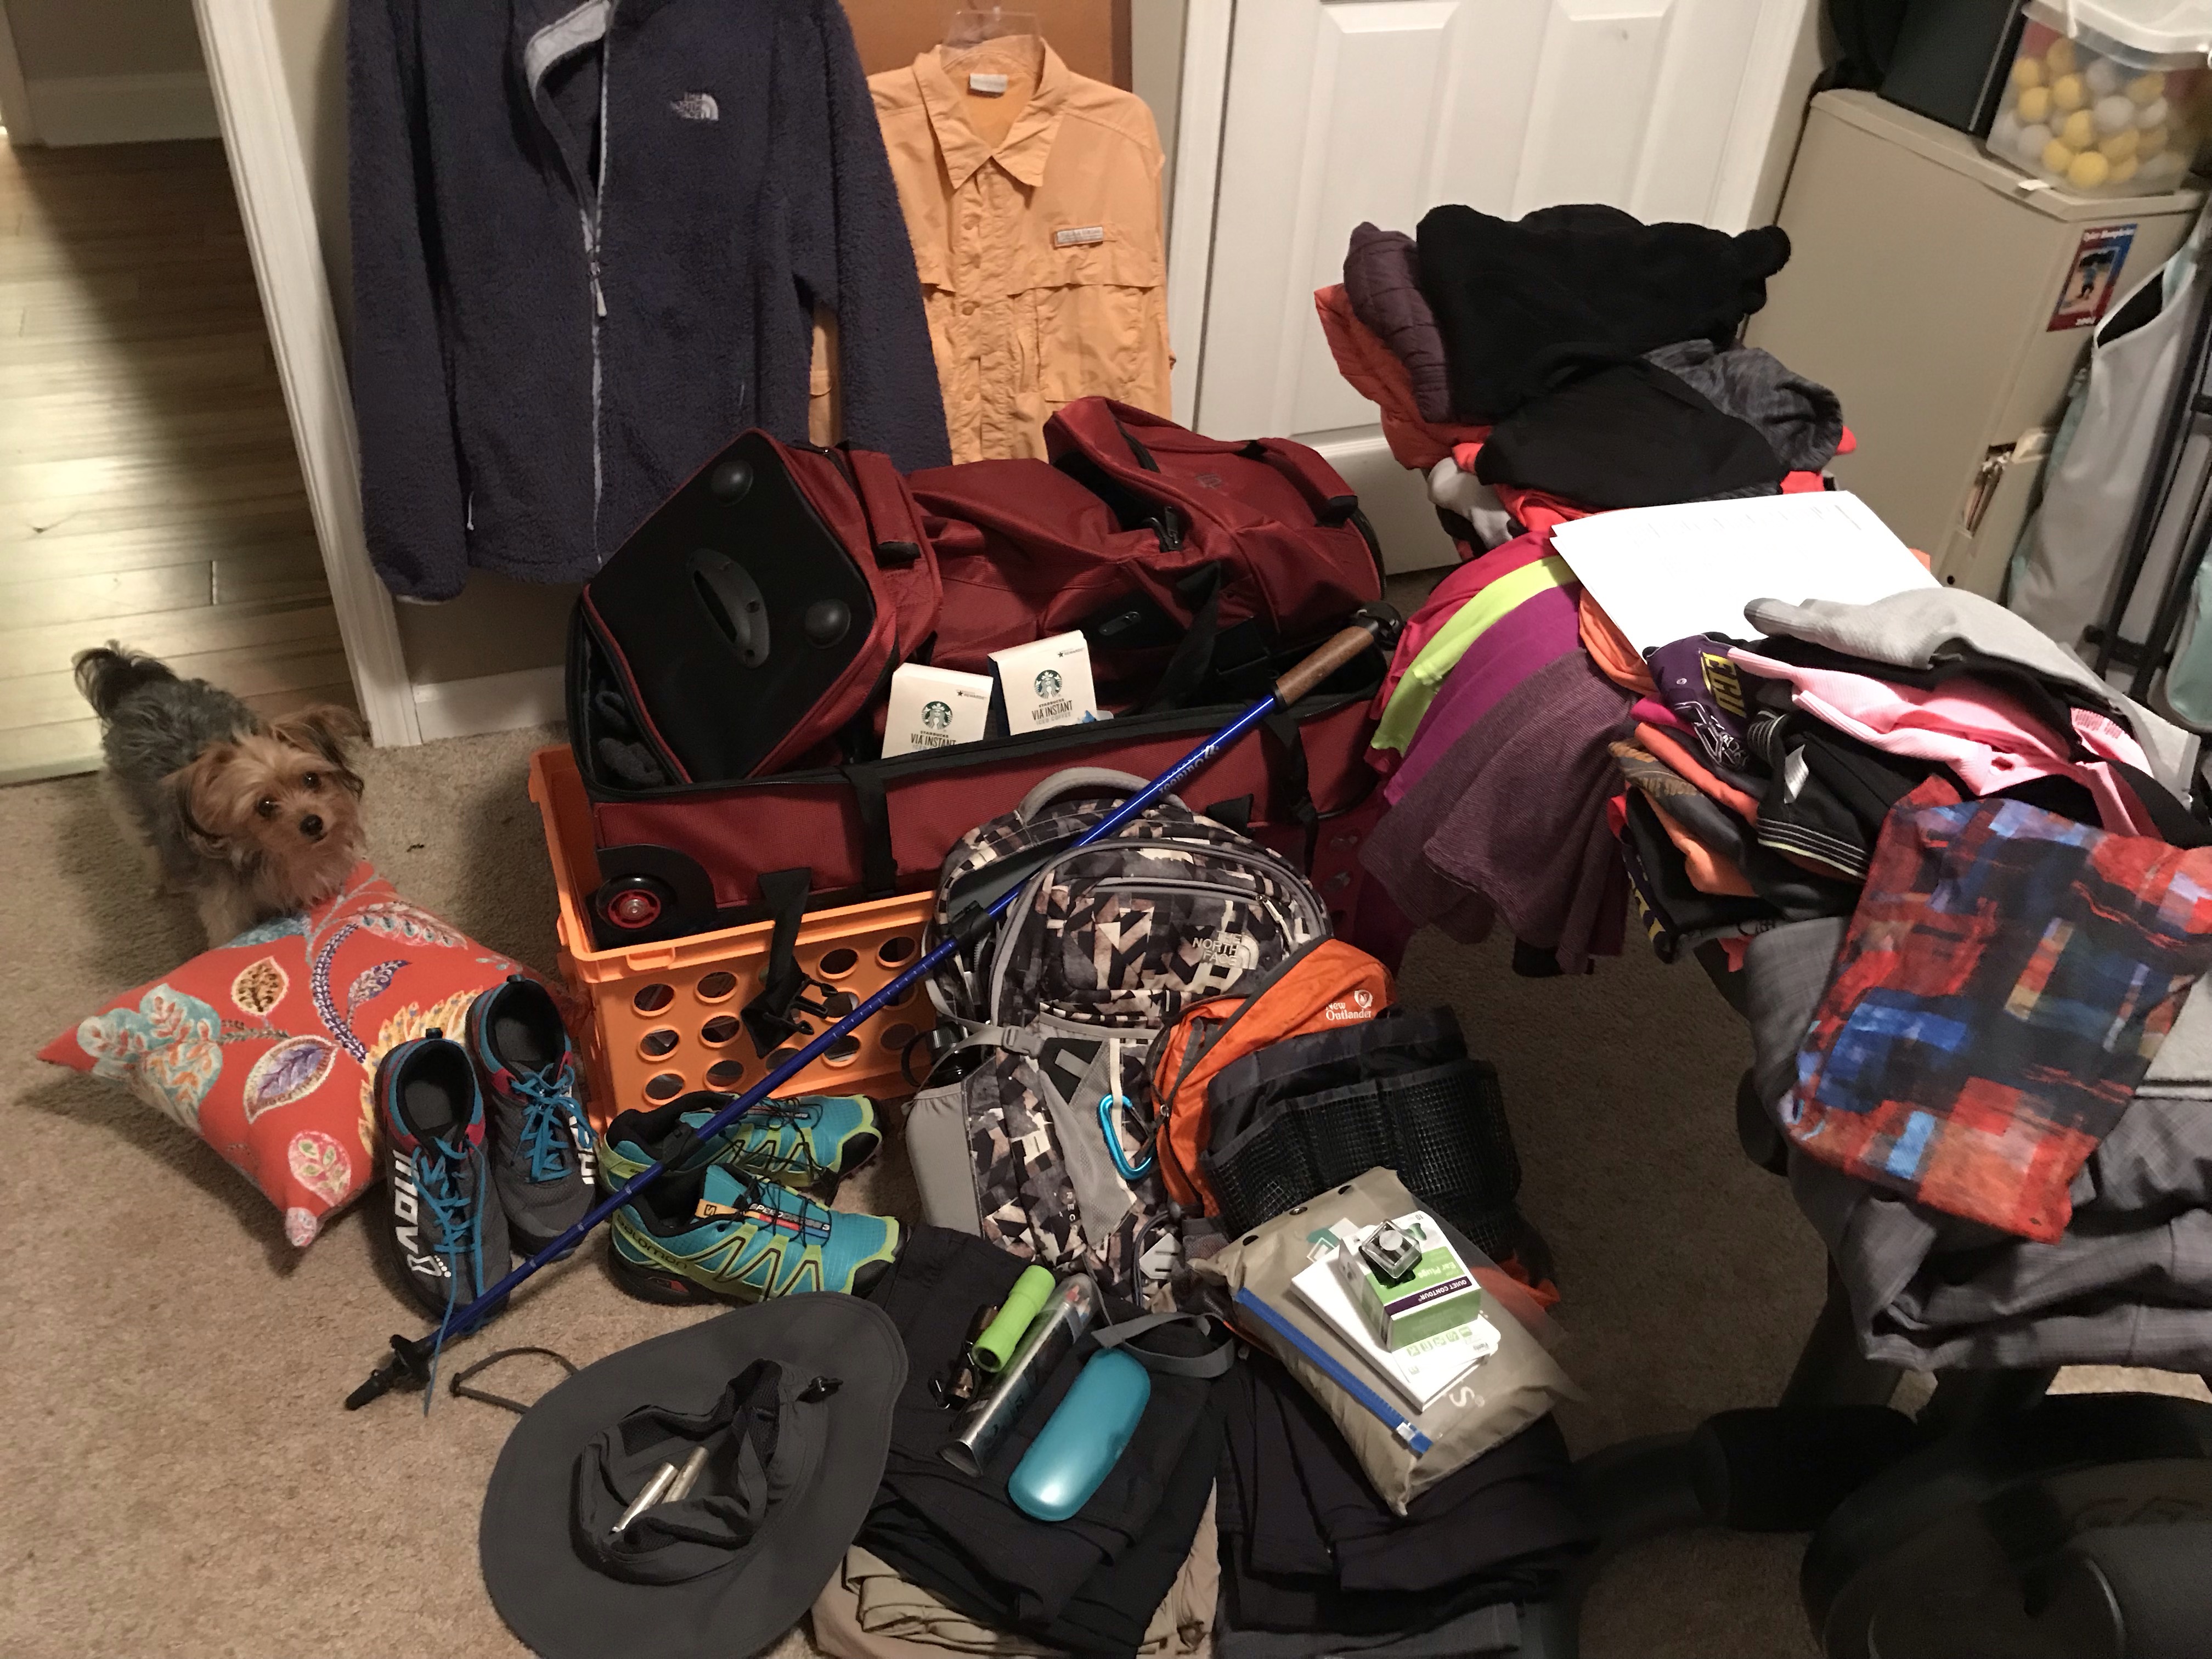 Pile of clothes and gear 